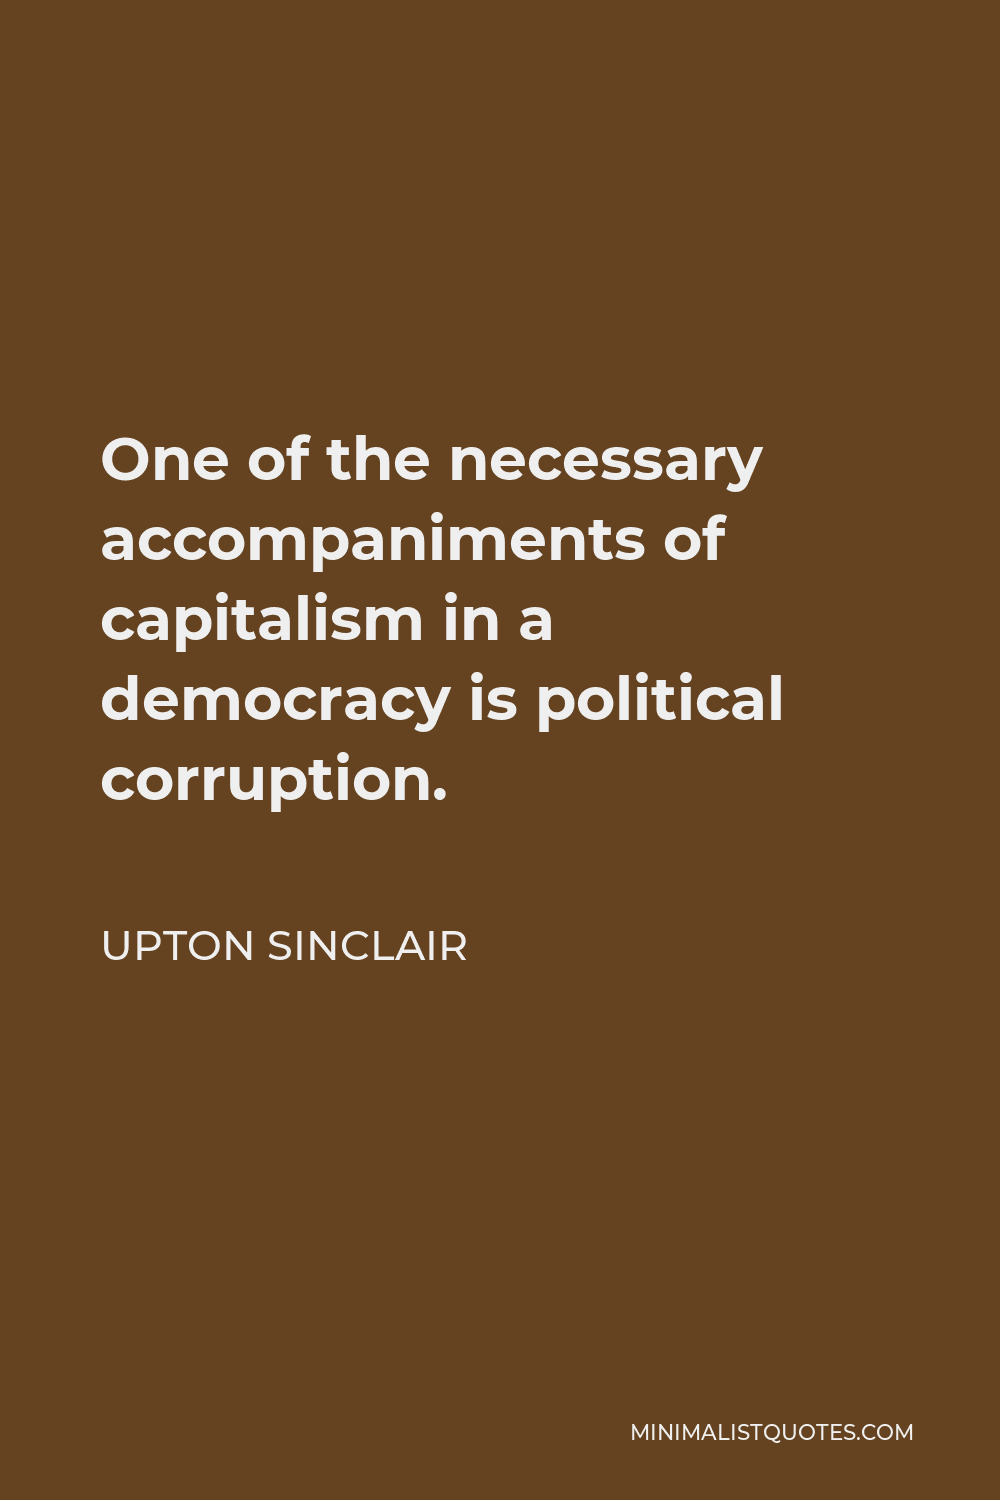 Upton Sinclair Quote - One of the necessary accompaniments of capitalism in a democracy is political corruption.